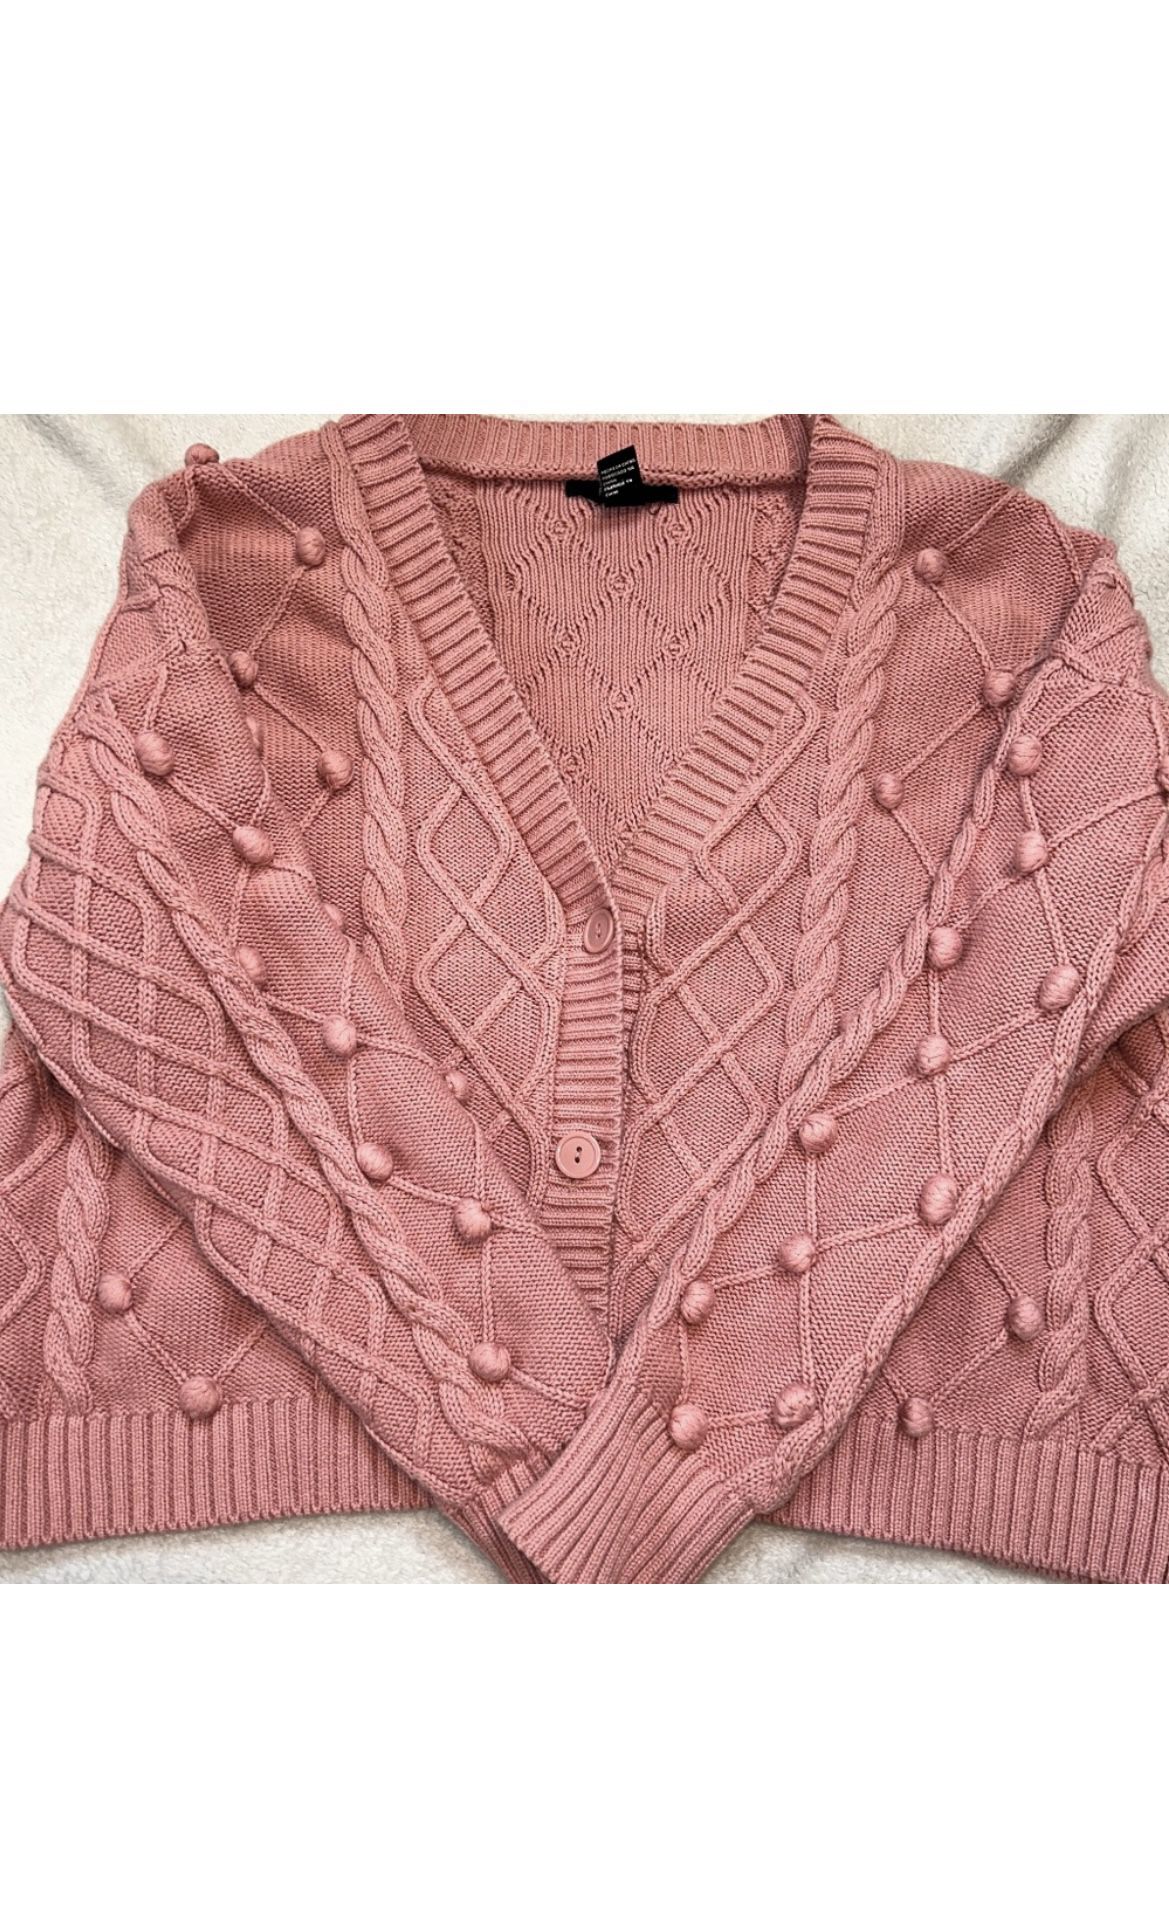 Forever 21 Pink Knit Sweater Cardigan